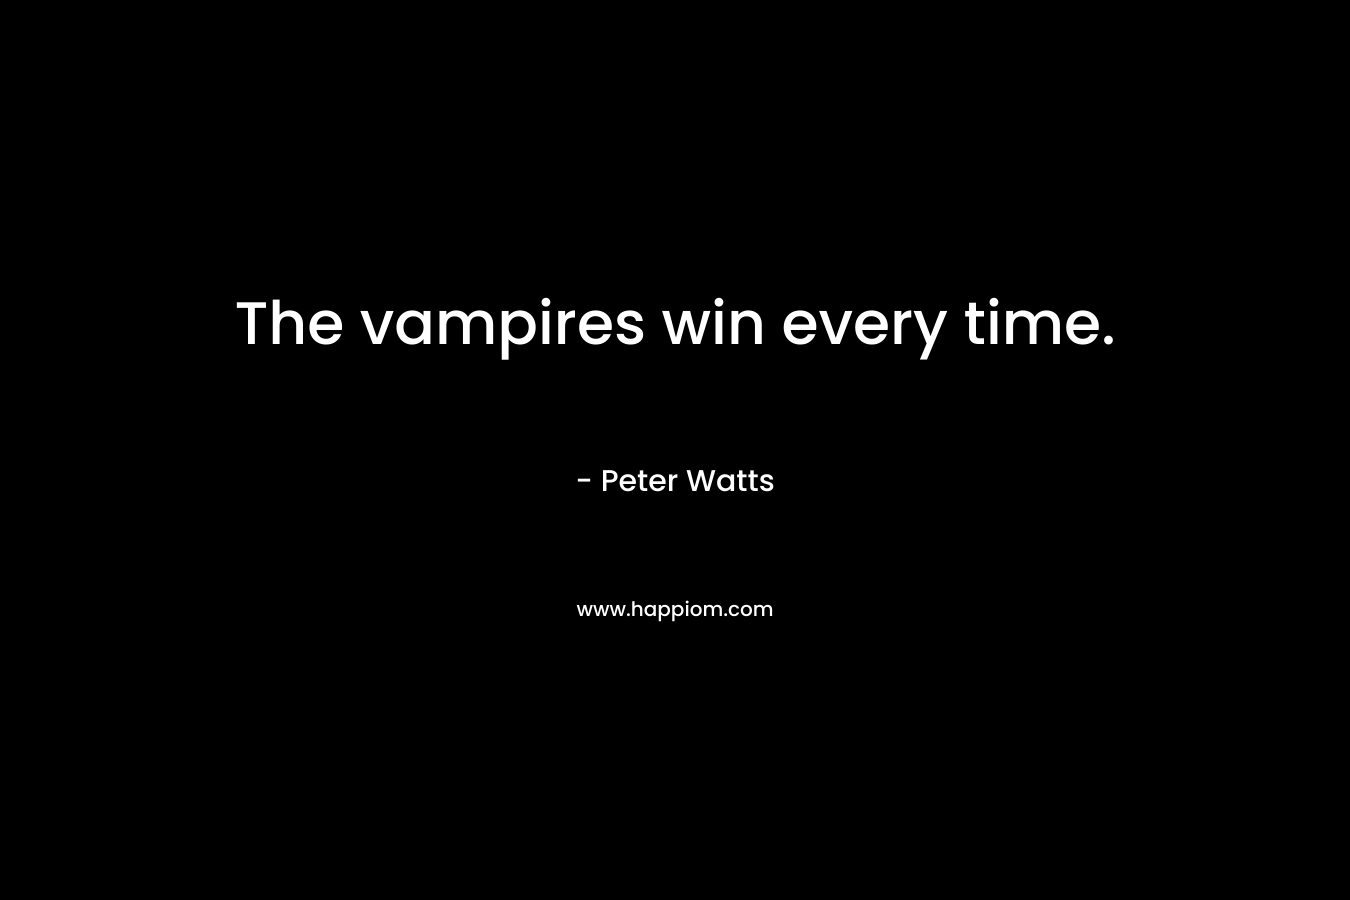 The vampires win every time.